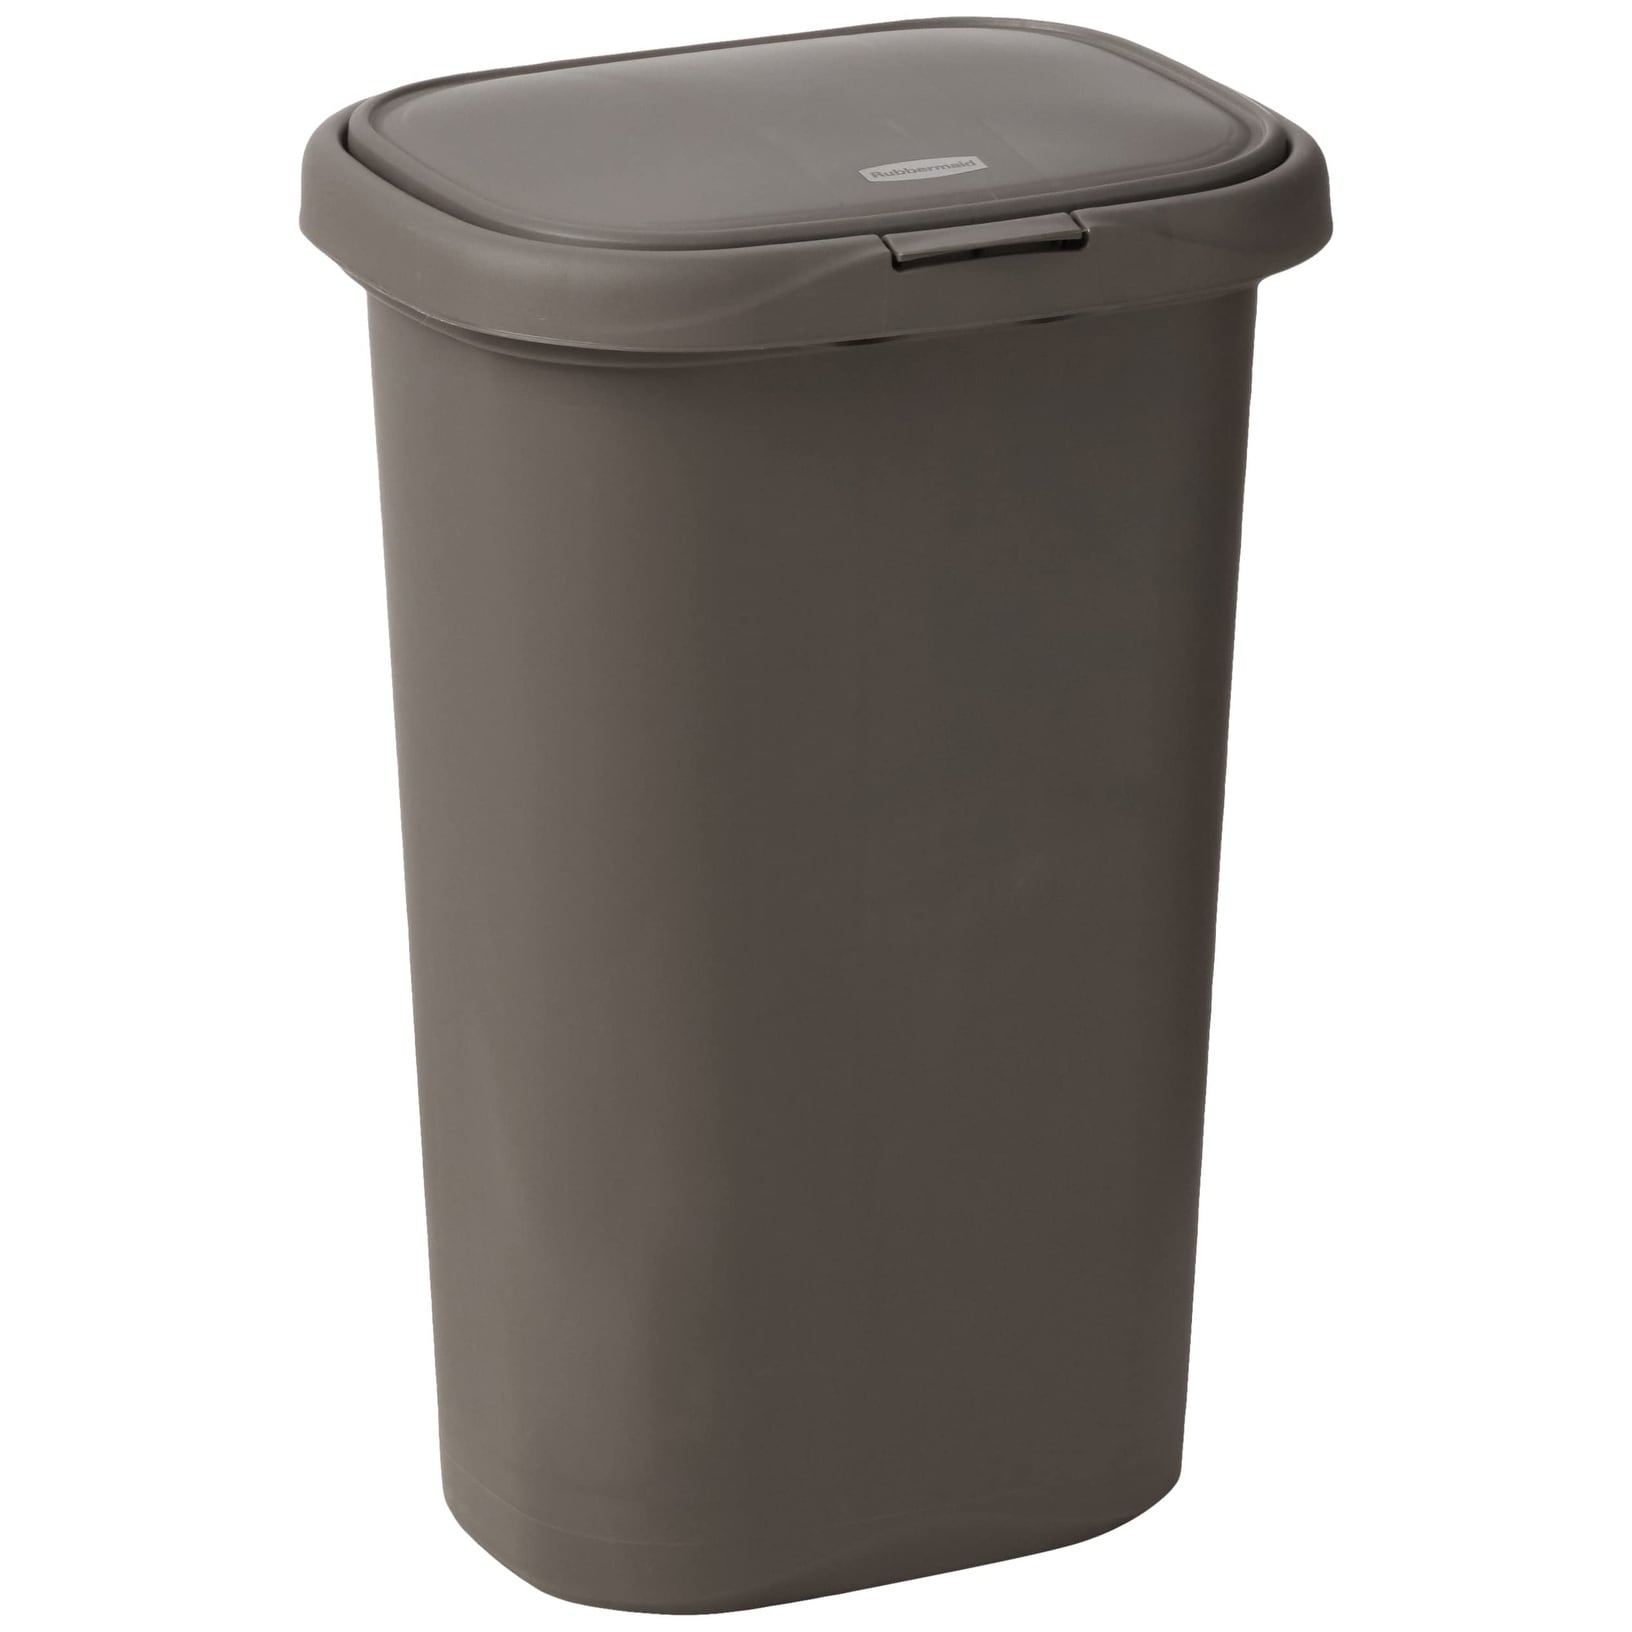 https://ak1.ostkcdn.com/images/products/is/images/direct/26c20a0b06e825fe5715eb4abff9e6dd0c7b160c/Spring-Top-Kitchen-Bathroom-Trash-Can-with-Lid%2C-13-Gallon-Gray-Plastic-Garbage-Bin%2C-49.2-liter.jpg